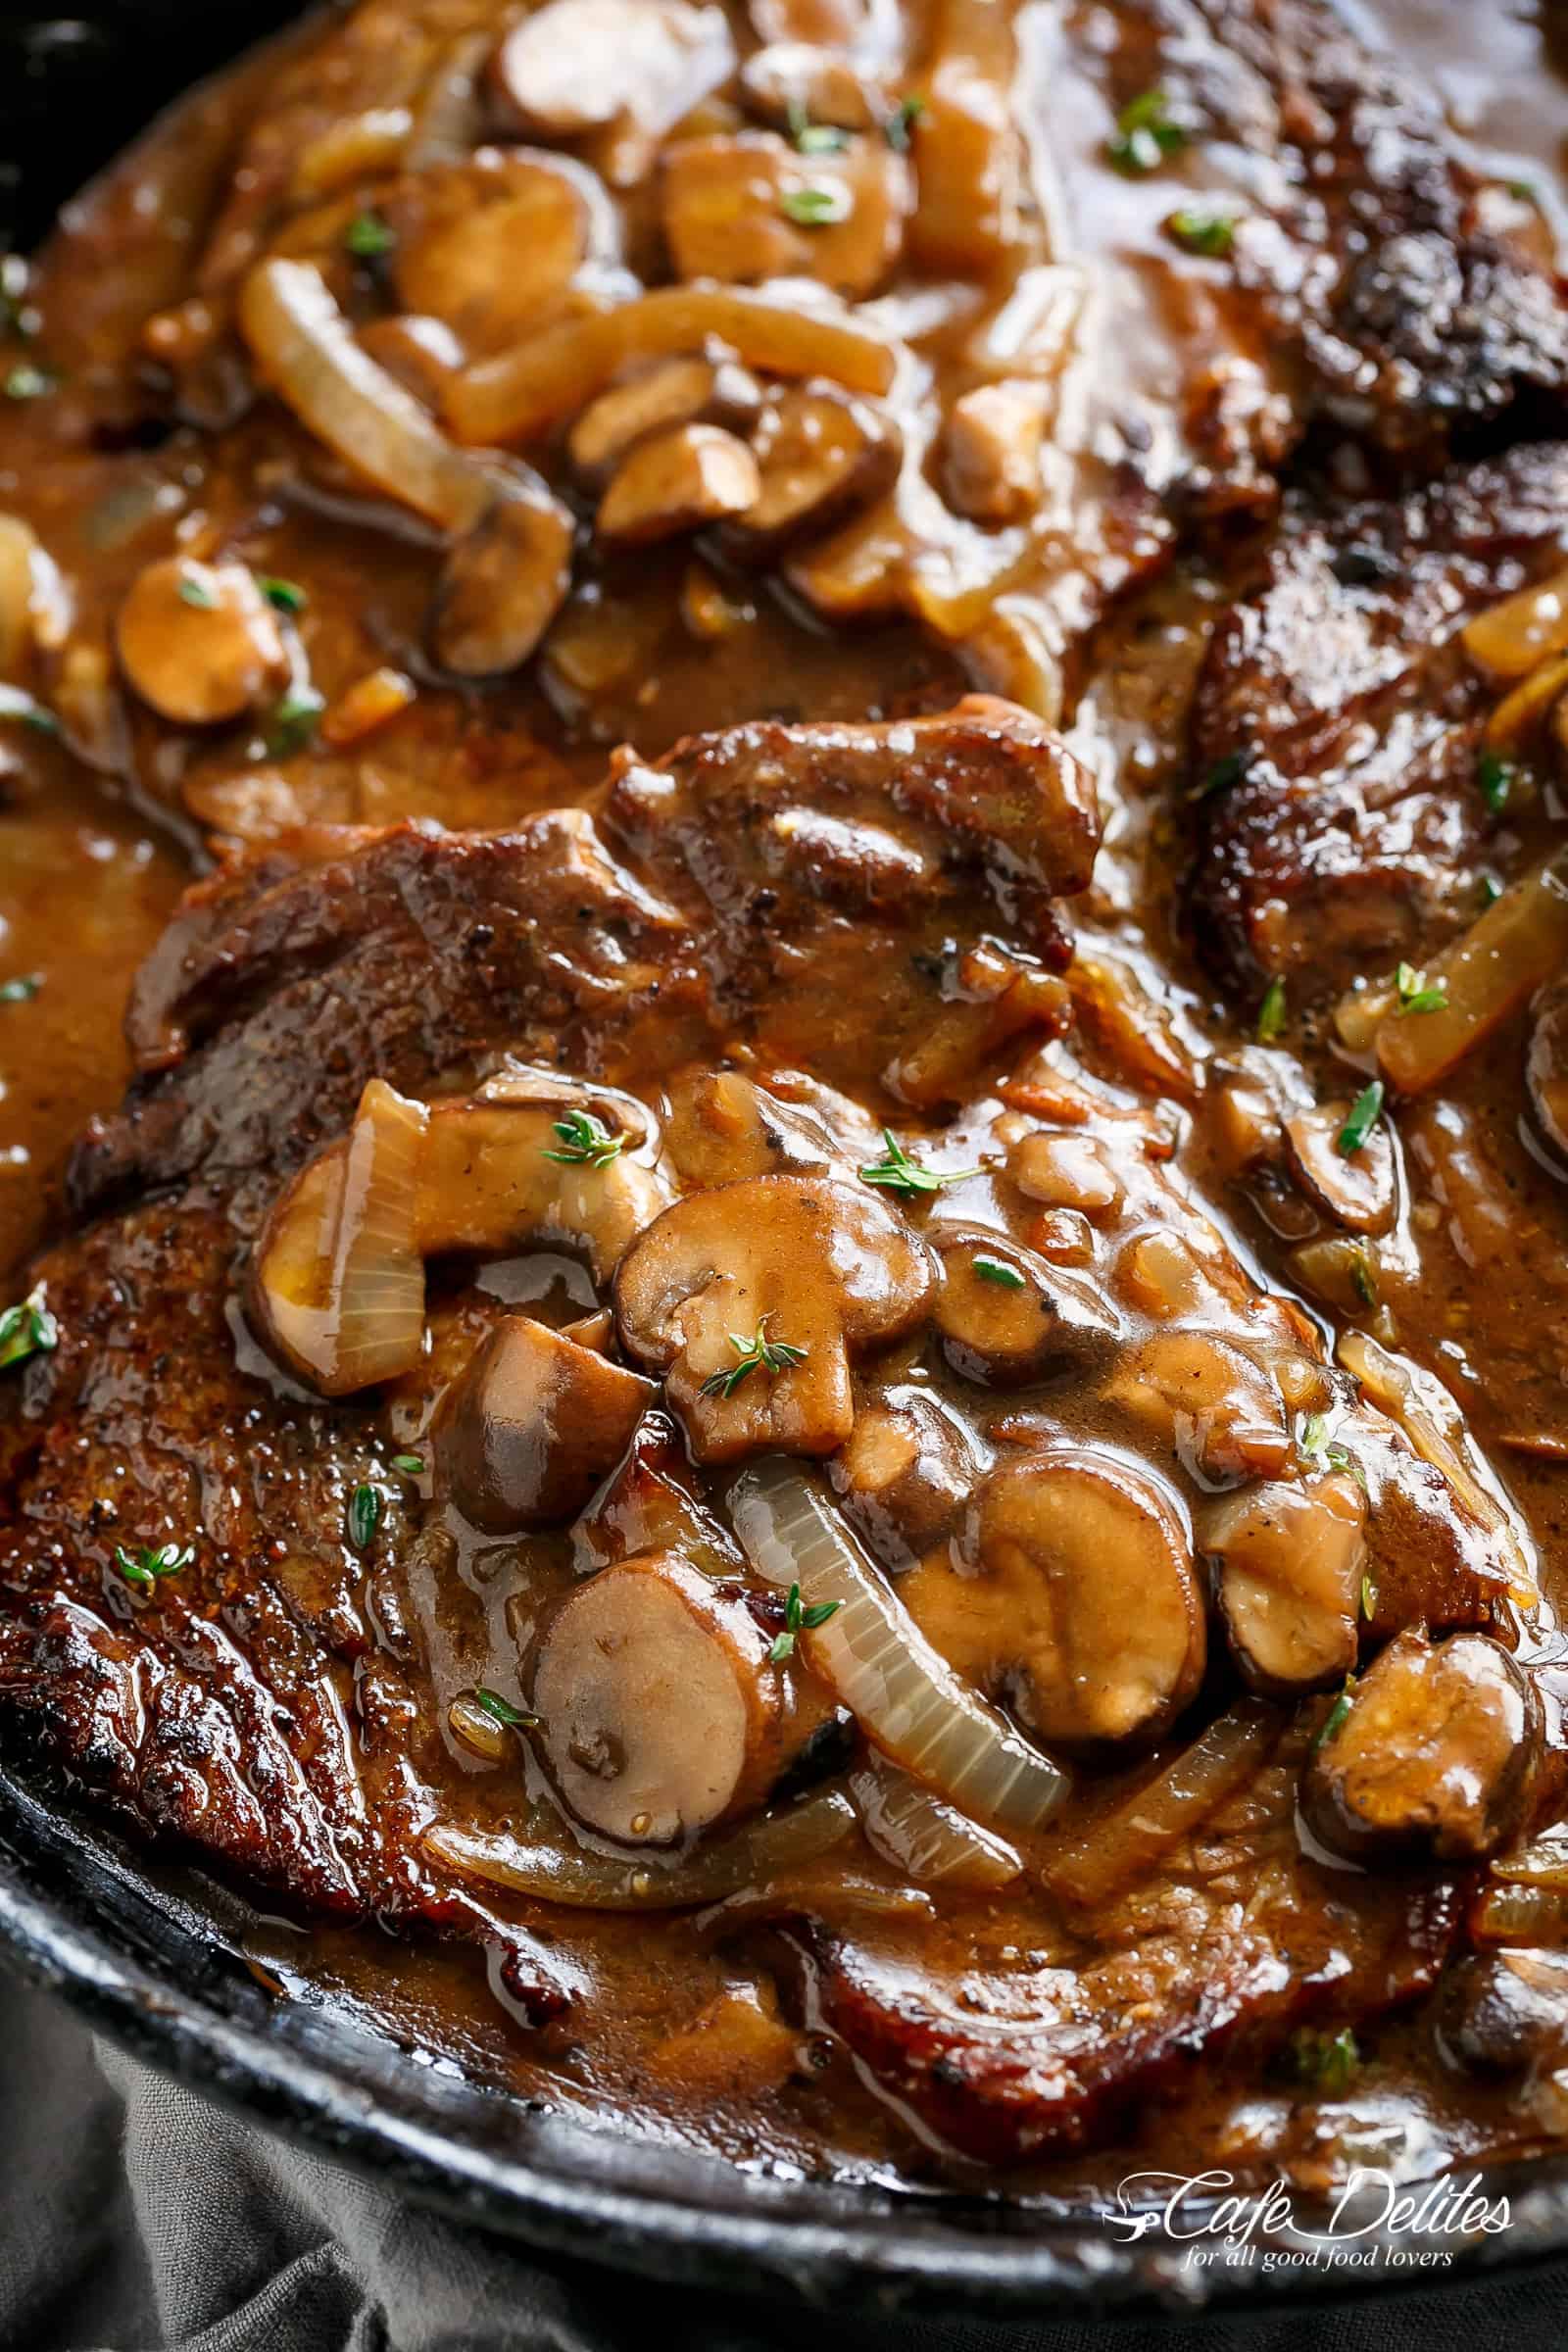 Ribeye Steaks With Mushroom Gravy is simple and delicious for any steak and gravy fan! | cafedelites.com